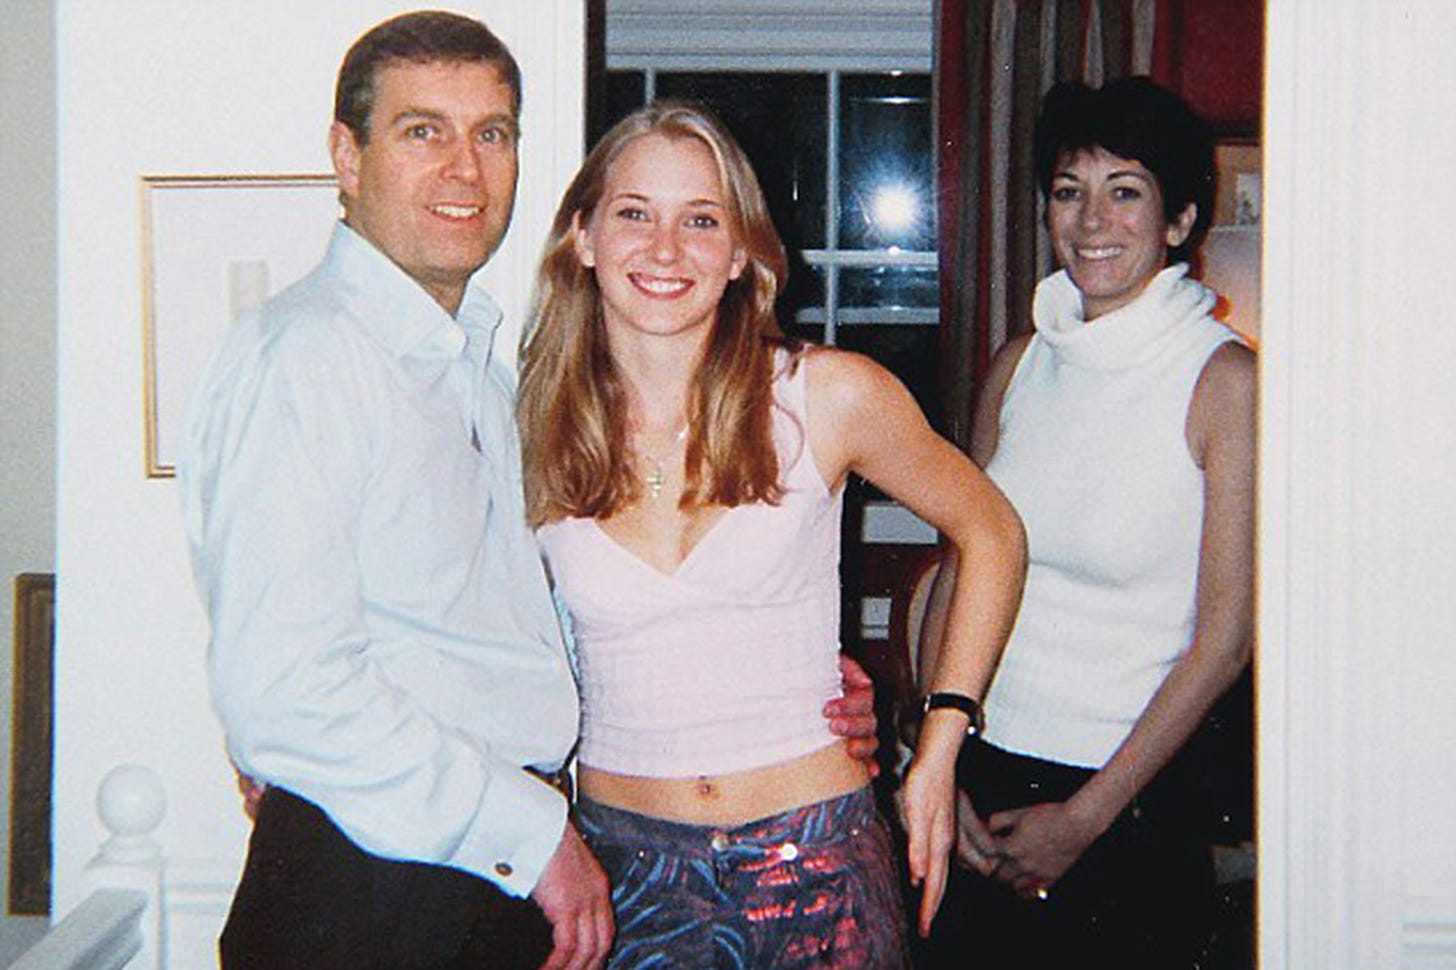 Prince Andrew may have more trouble from Virginia Roberts Guiffre